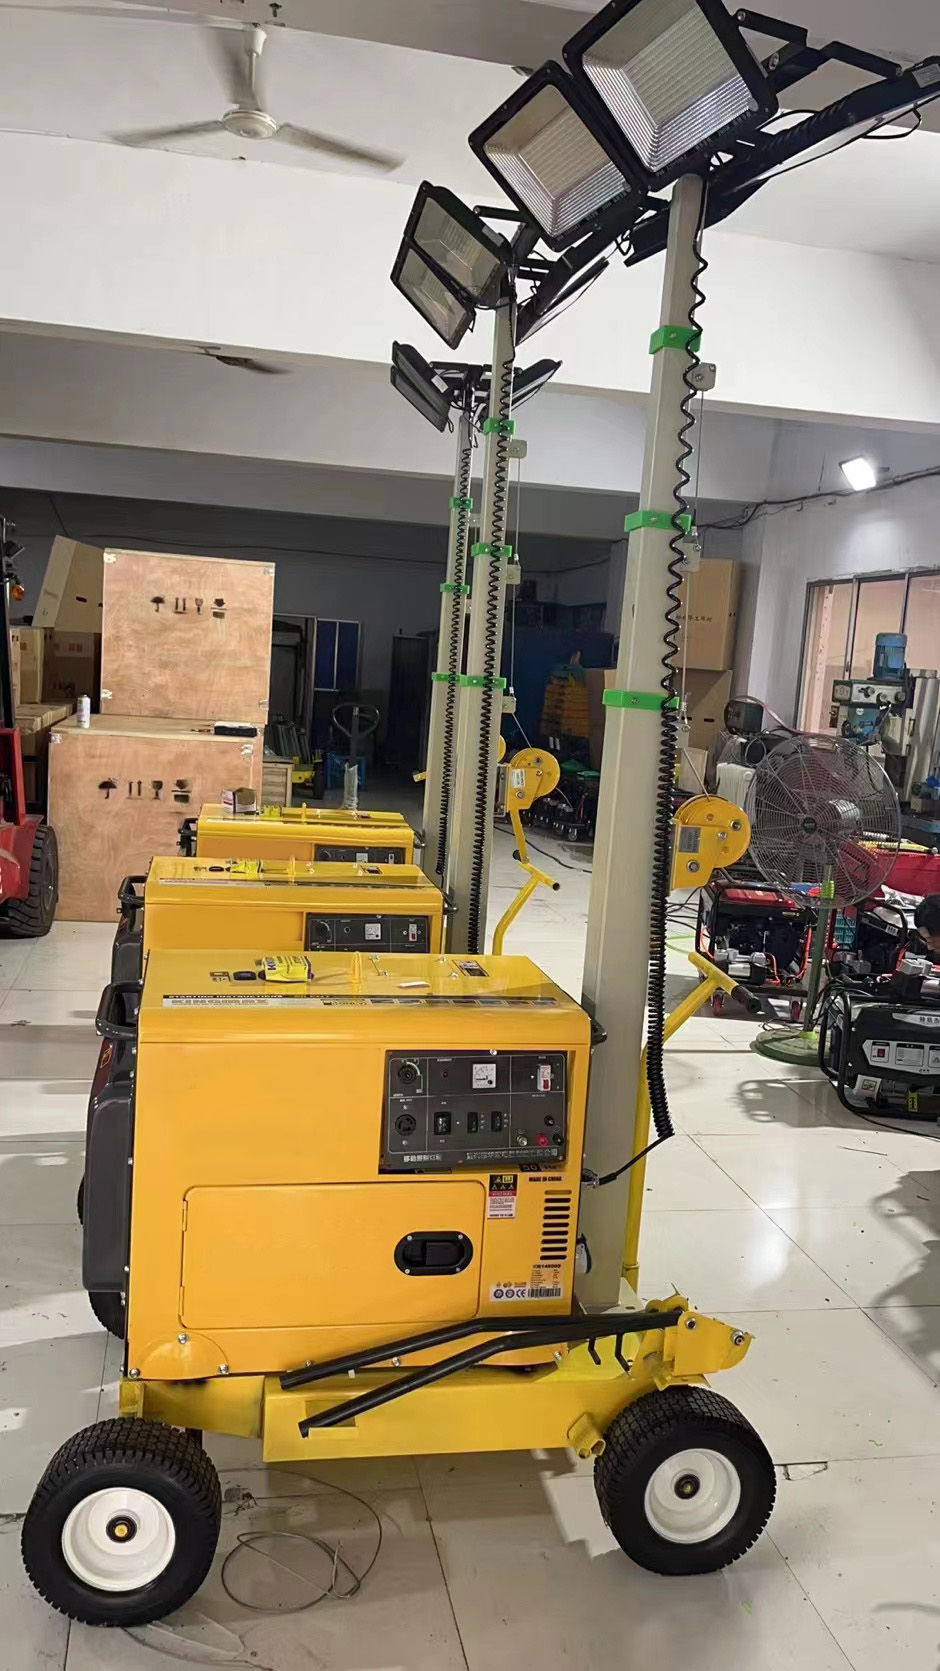 4000W 6000W light source 10 kw air cooled diesel engine towable light towers for emergency